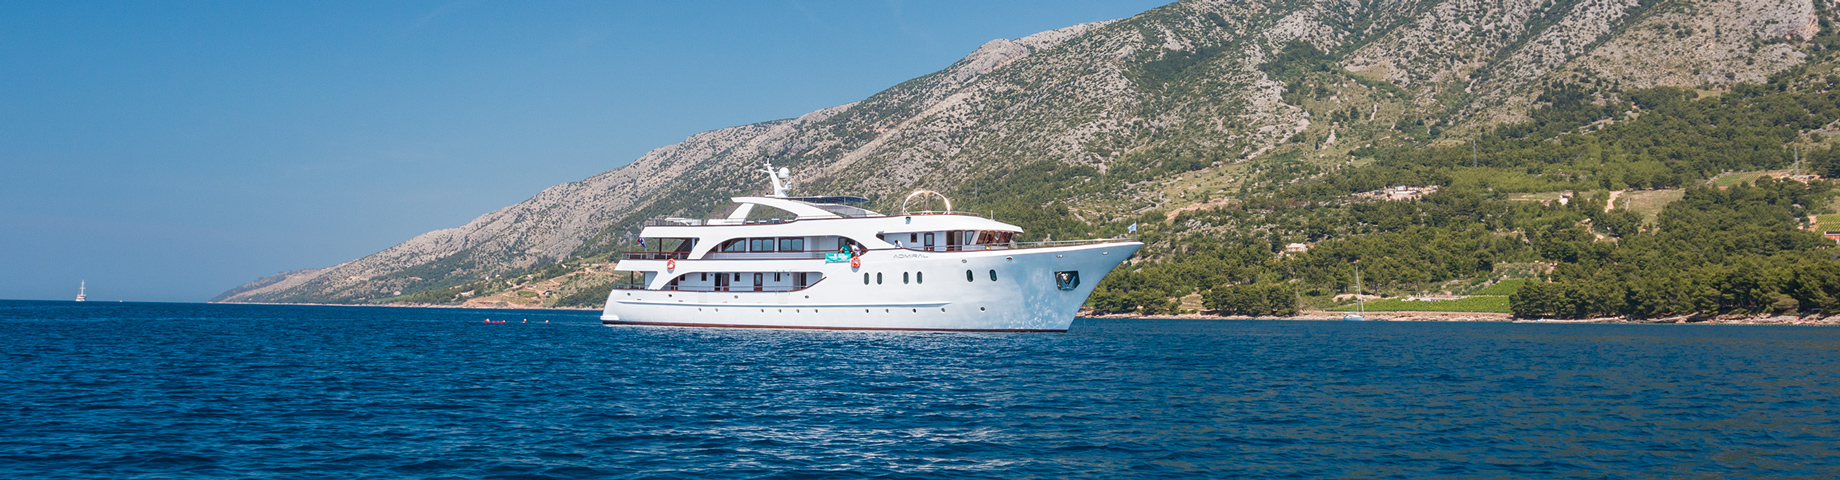 Yacht Sailing Cruise in Greece, Jewels of the Cyclades Sailing Odyssey